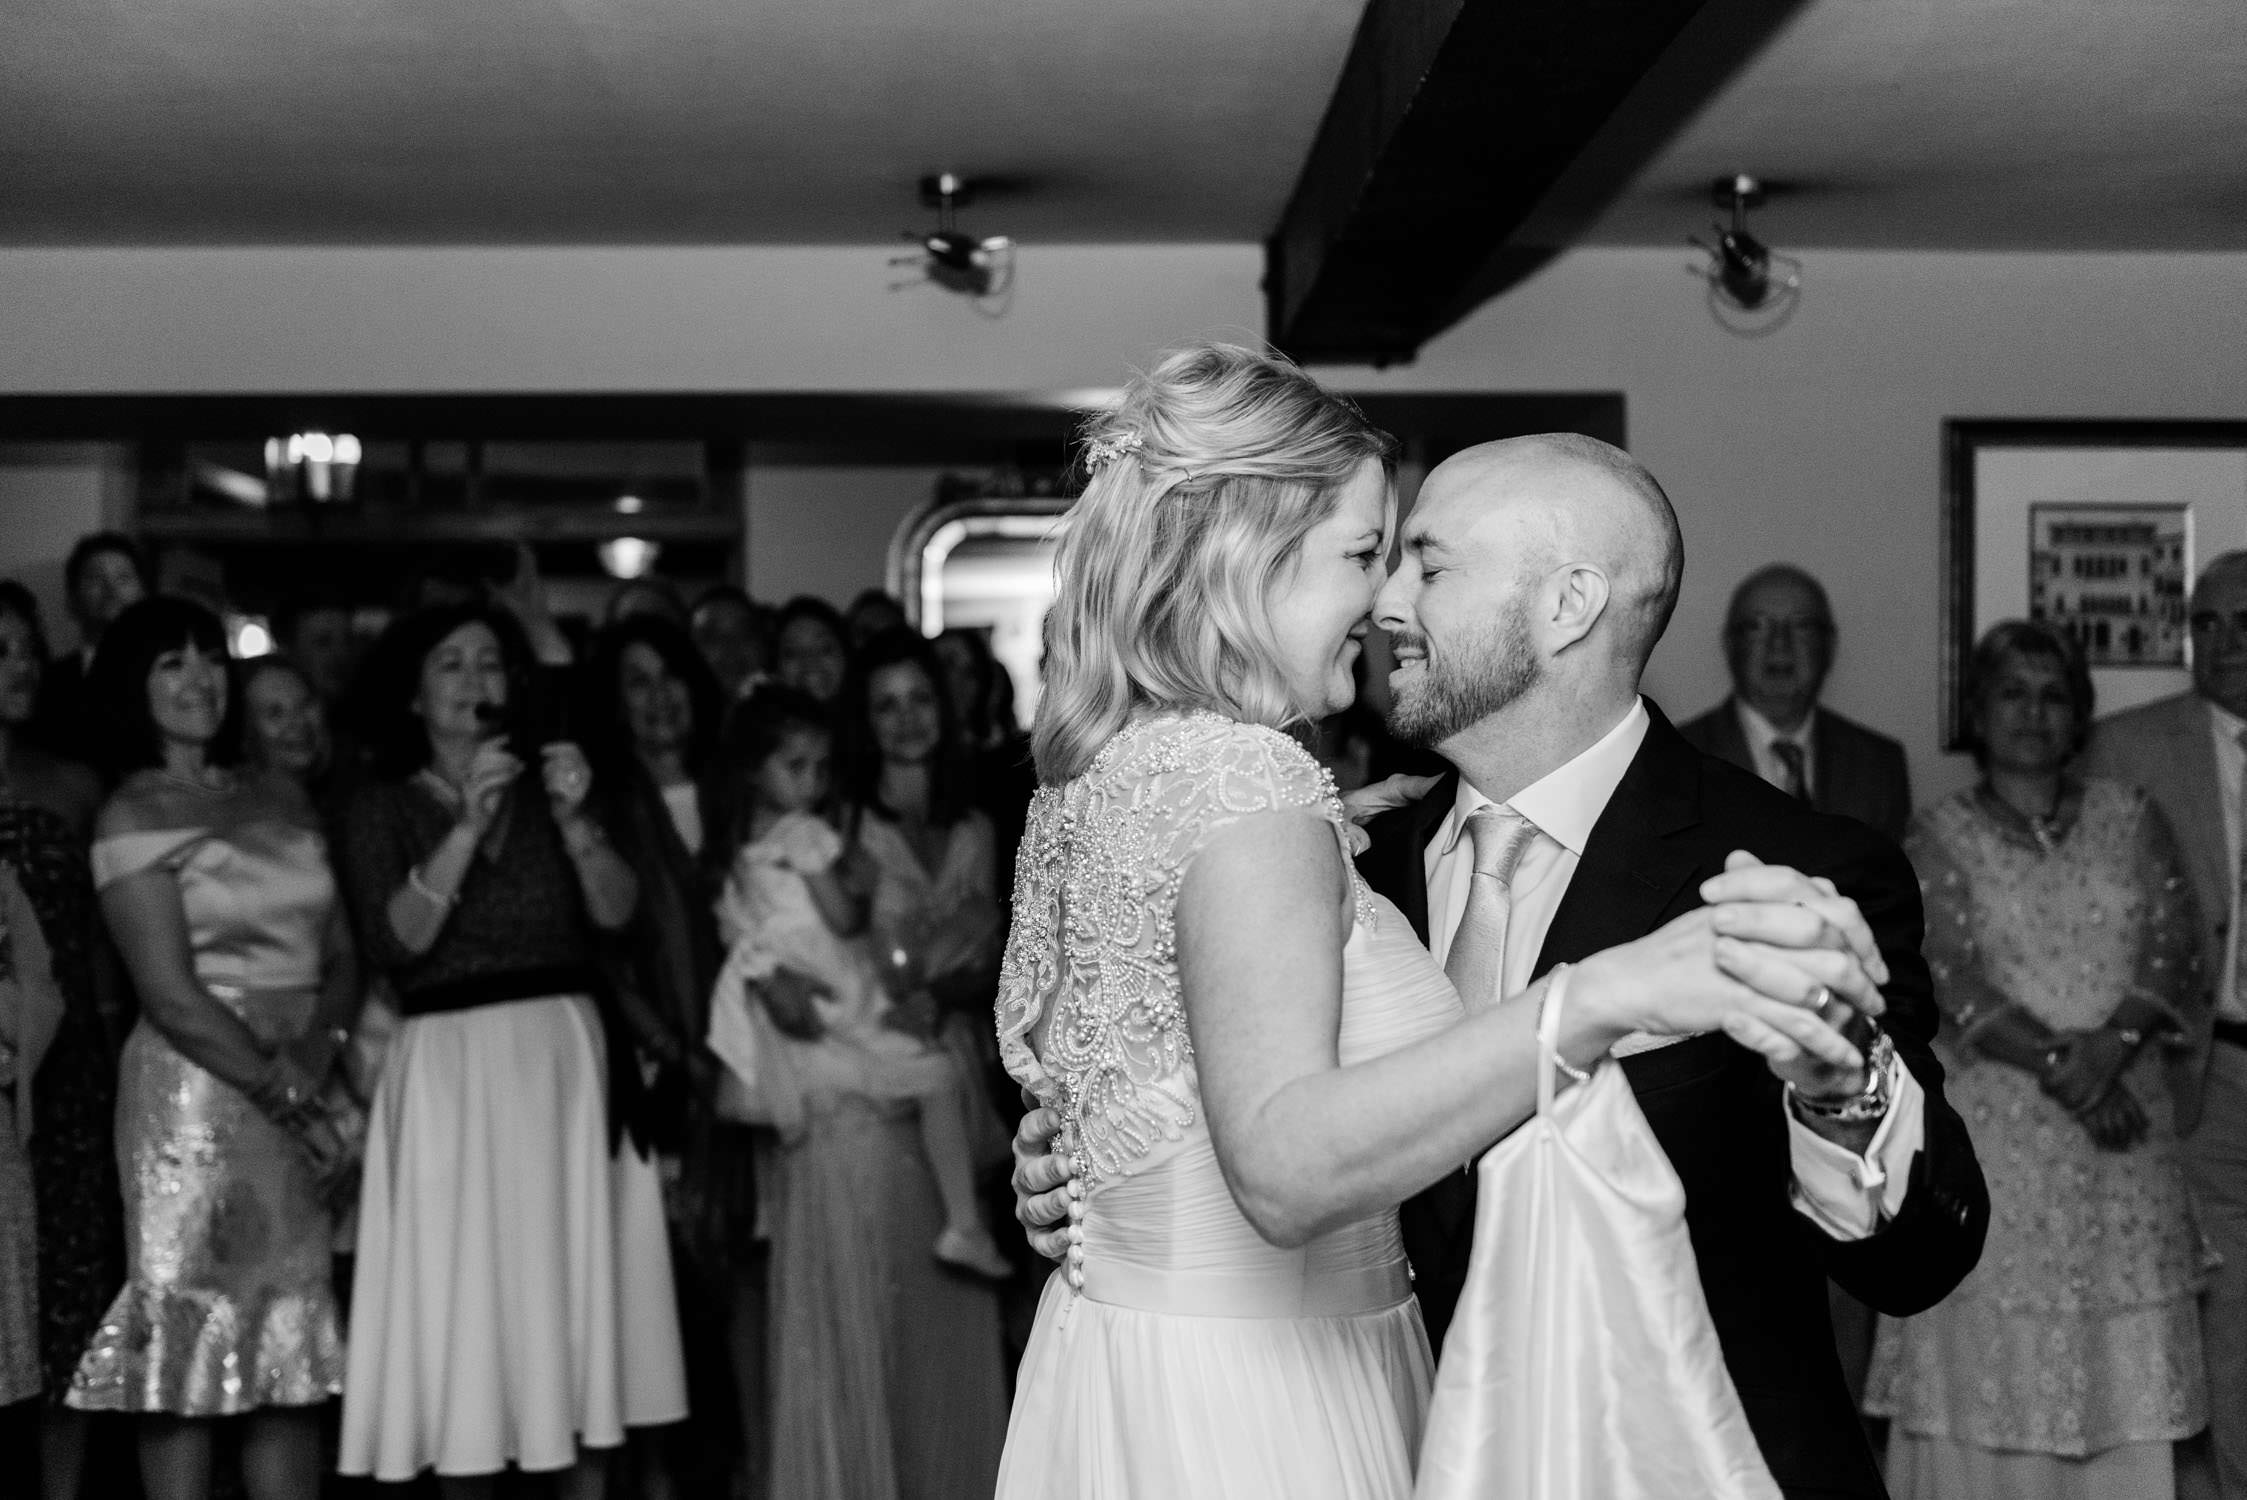 A bride and groom dancing the 1st dance at their wedding at the Bella Luce Hotel in Guernsey